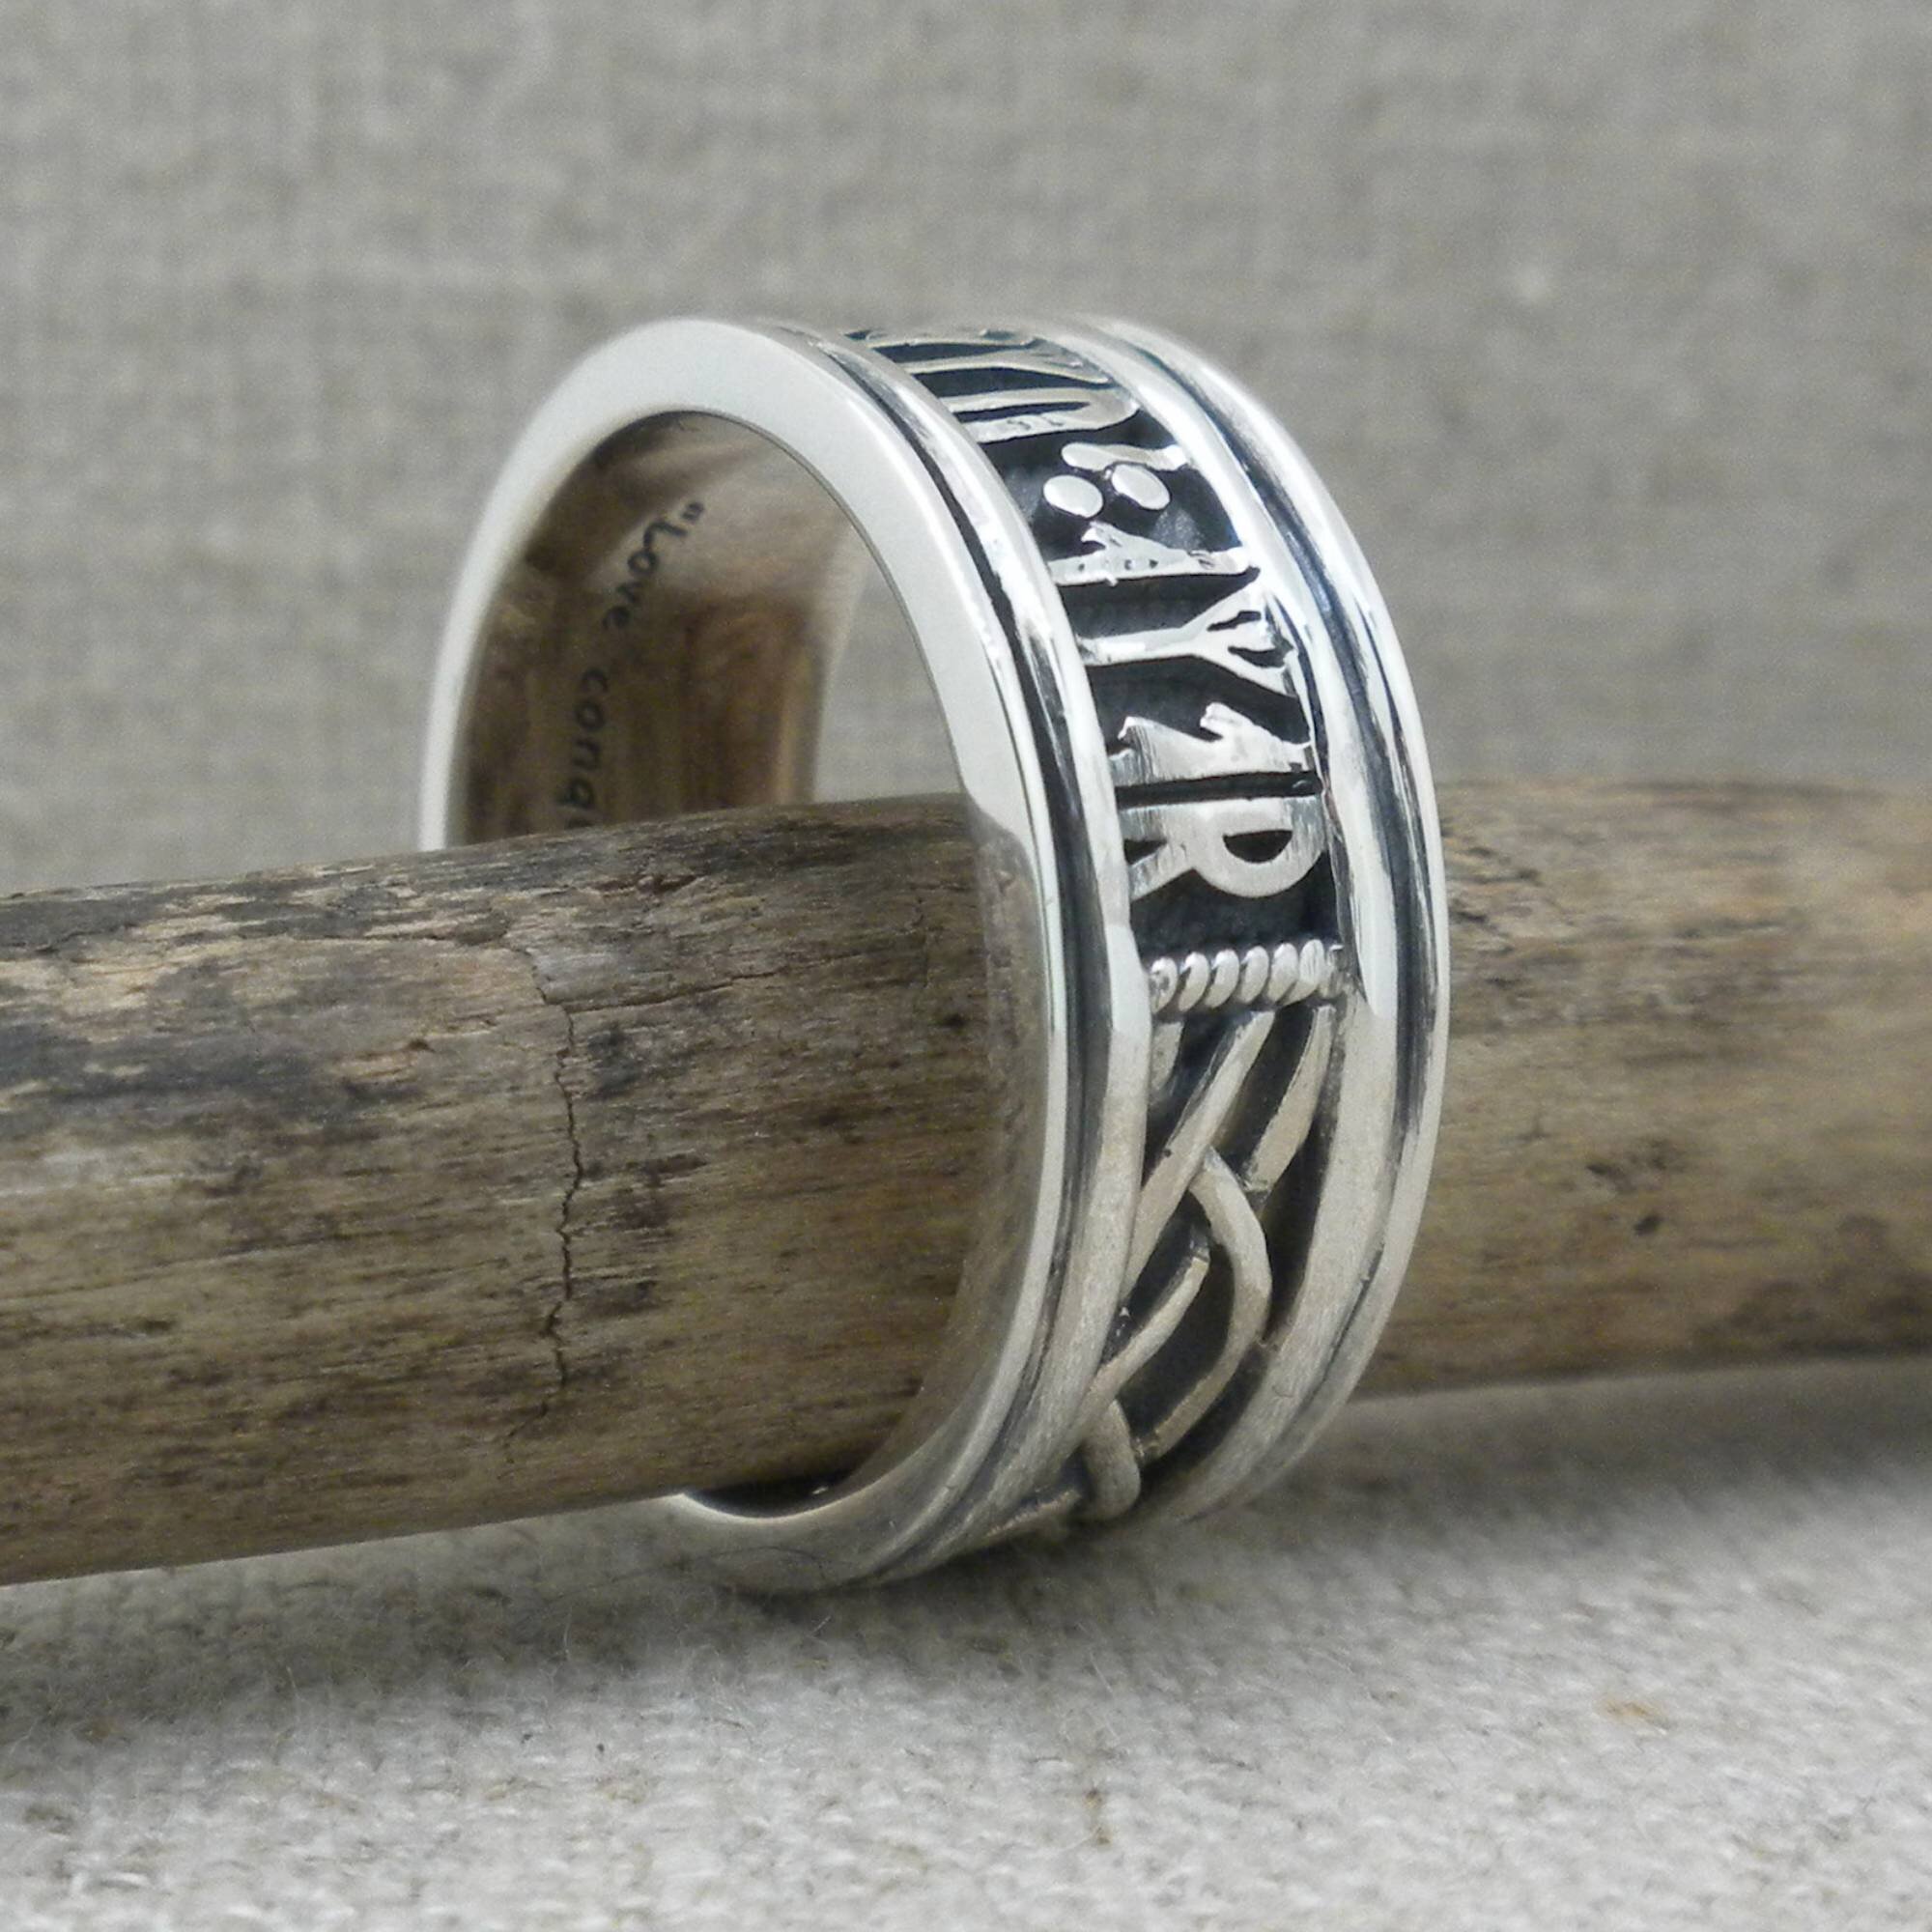 Keith Jack Rune ring Love Conquers All